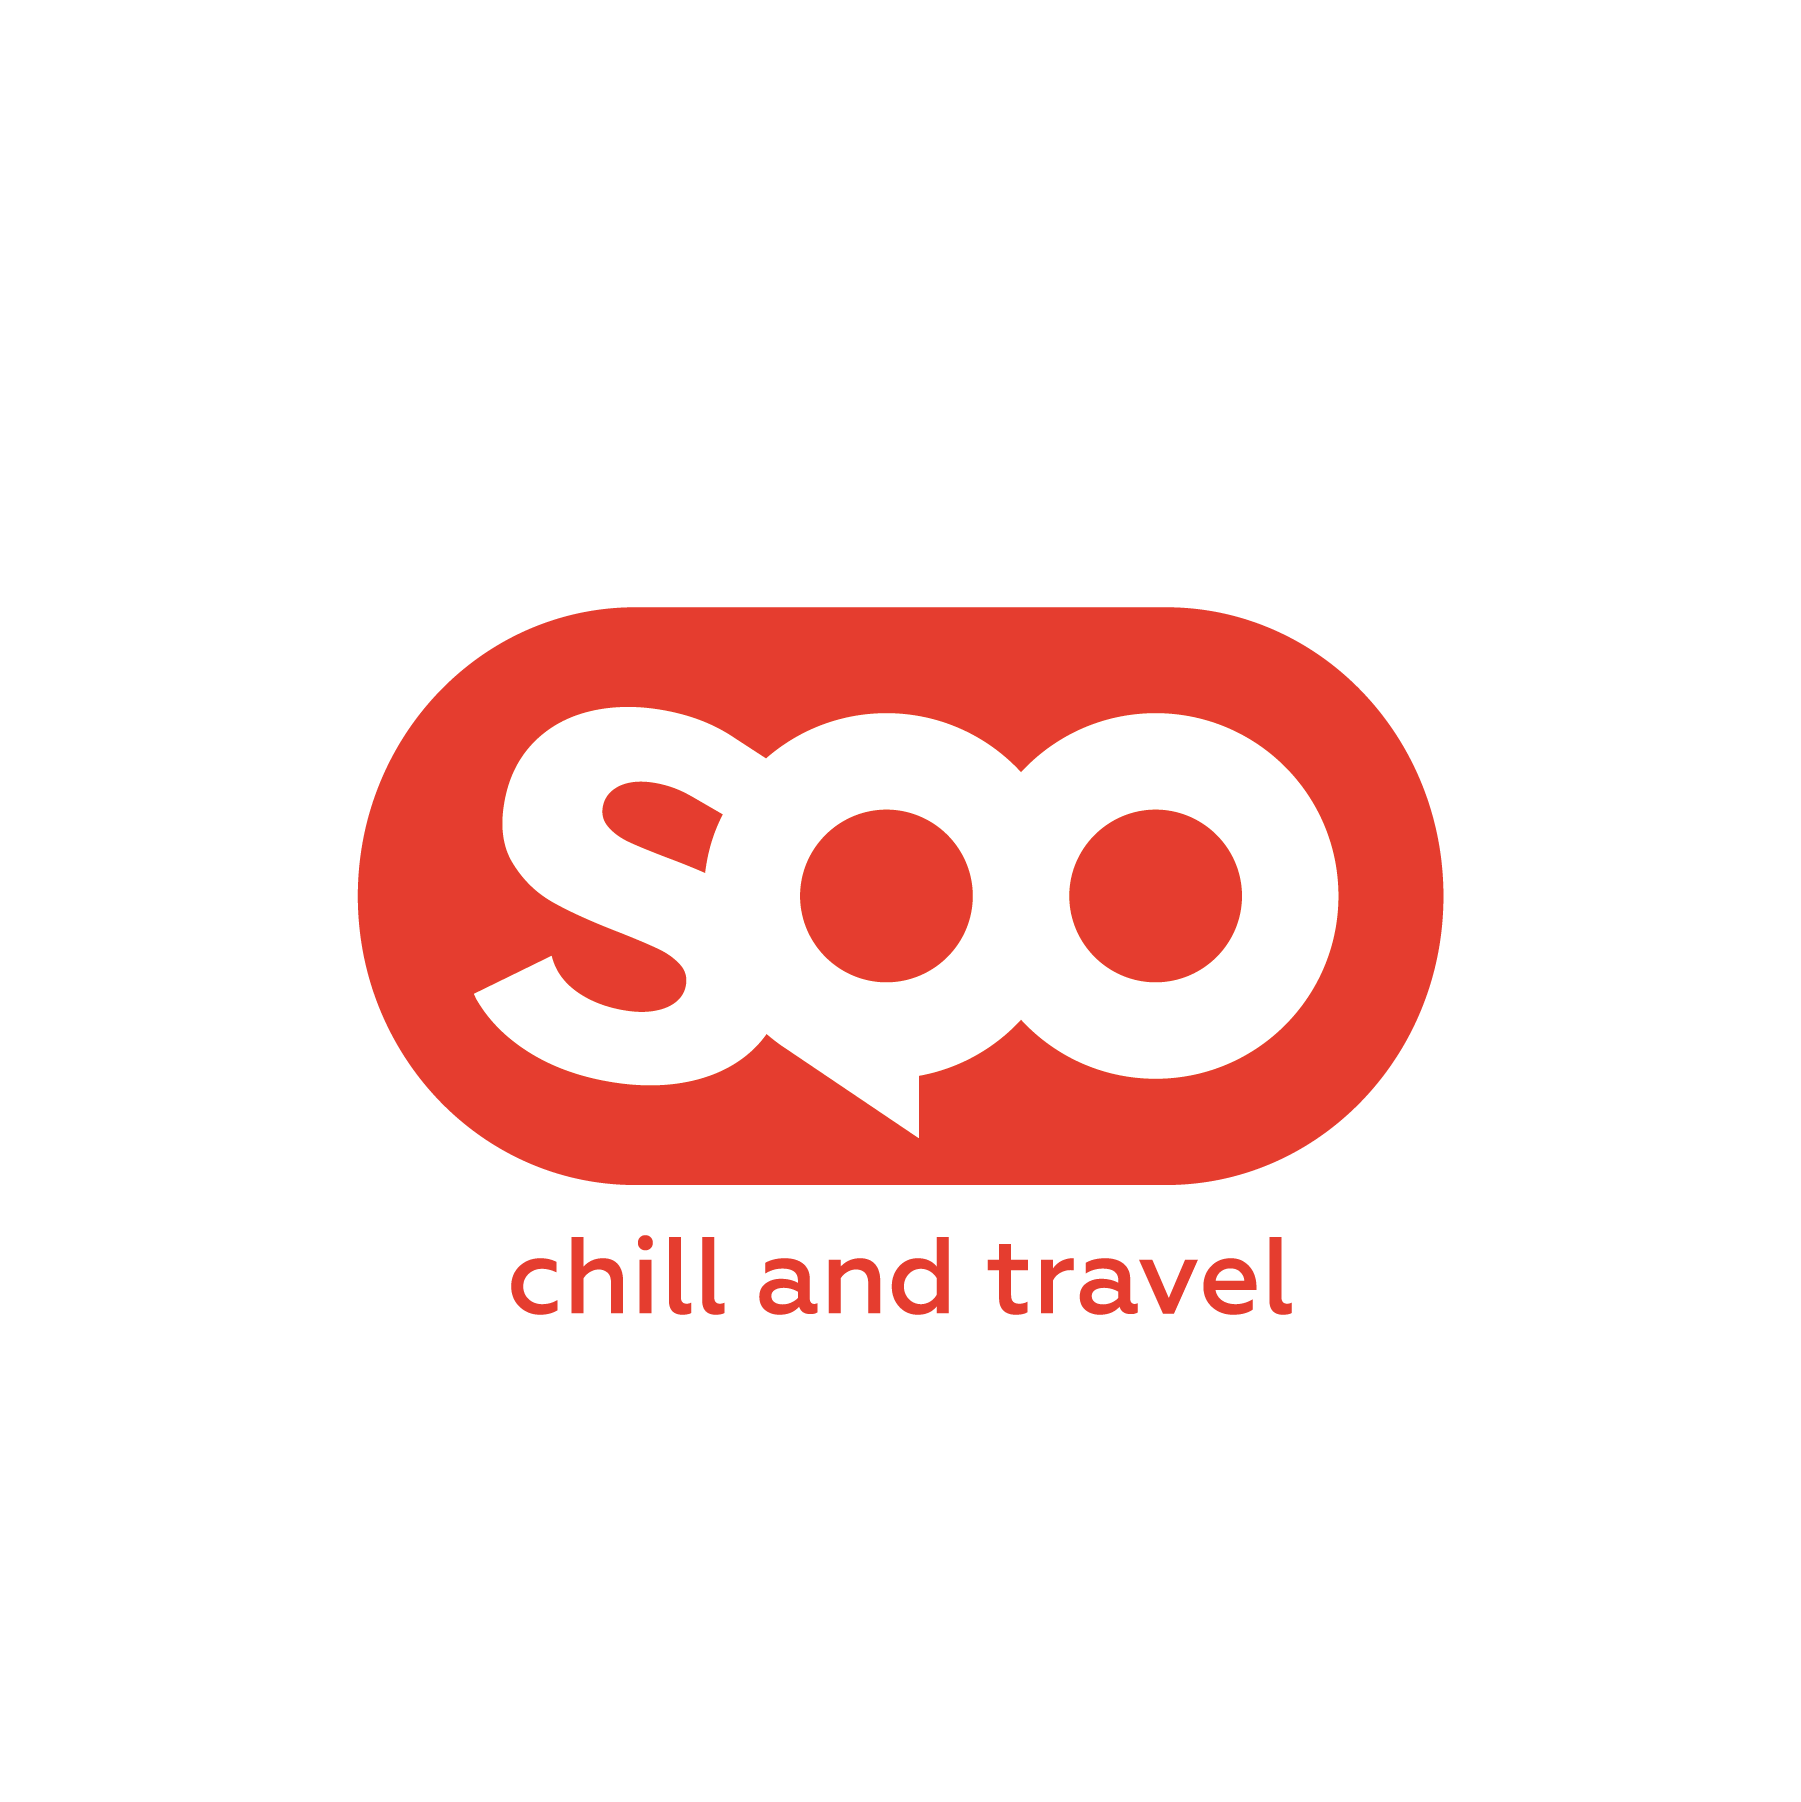 SQO logo design by logo designer OTLICHNOSTI for your inspiration and for the worlds largest logo competition